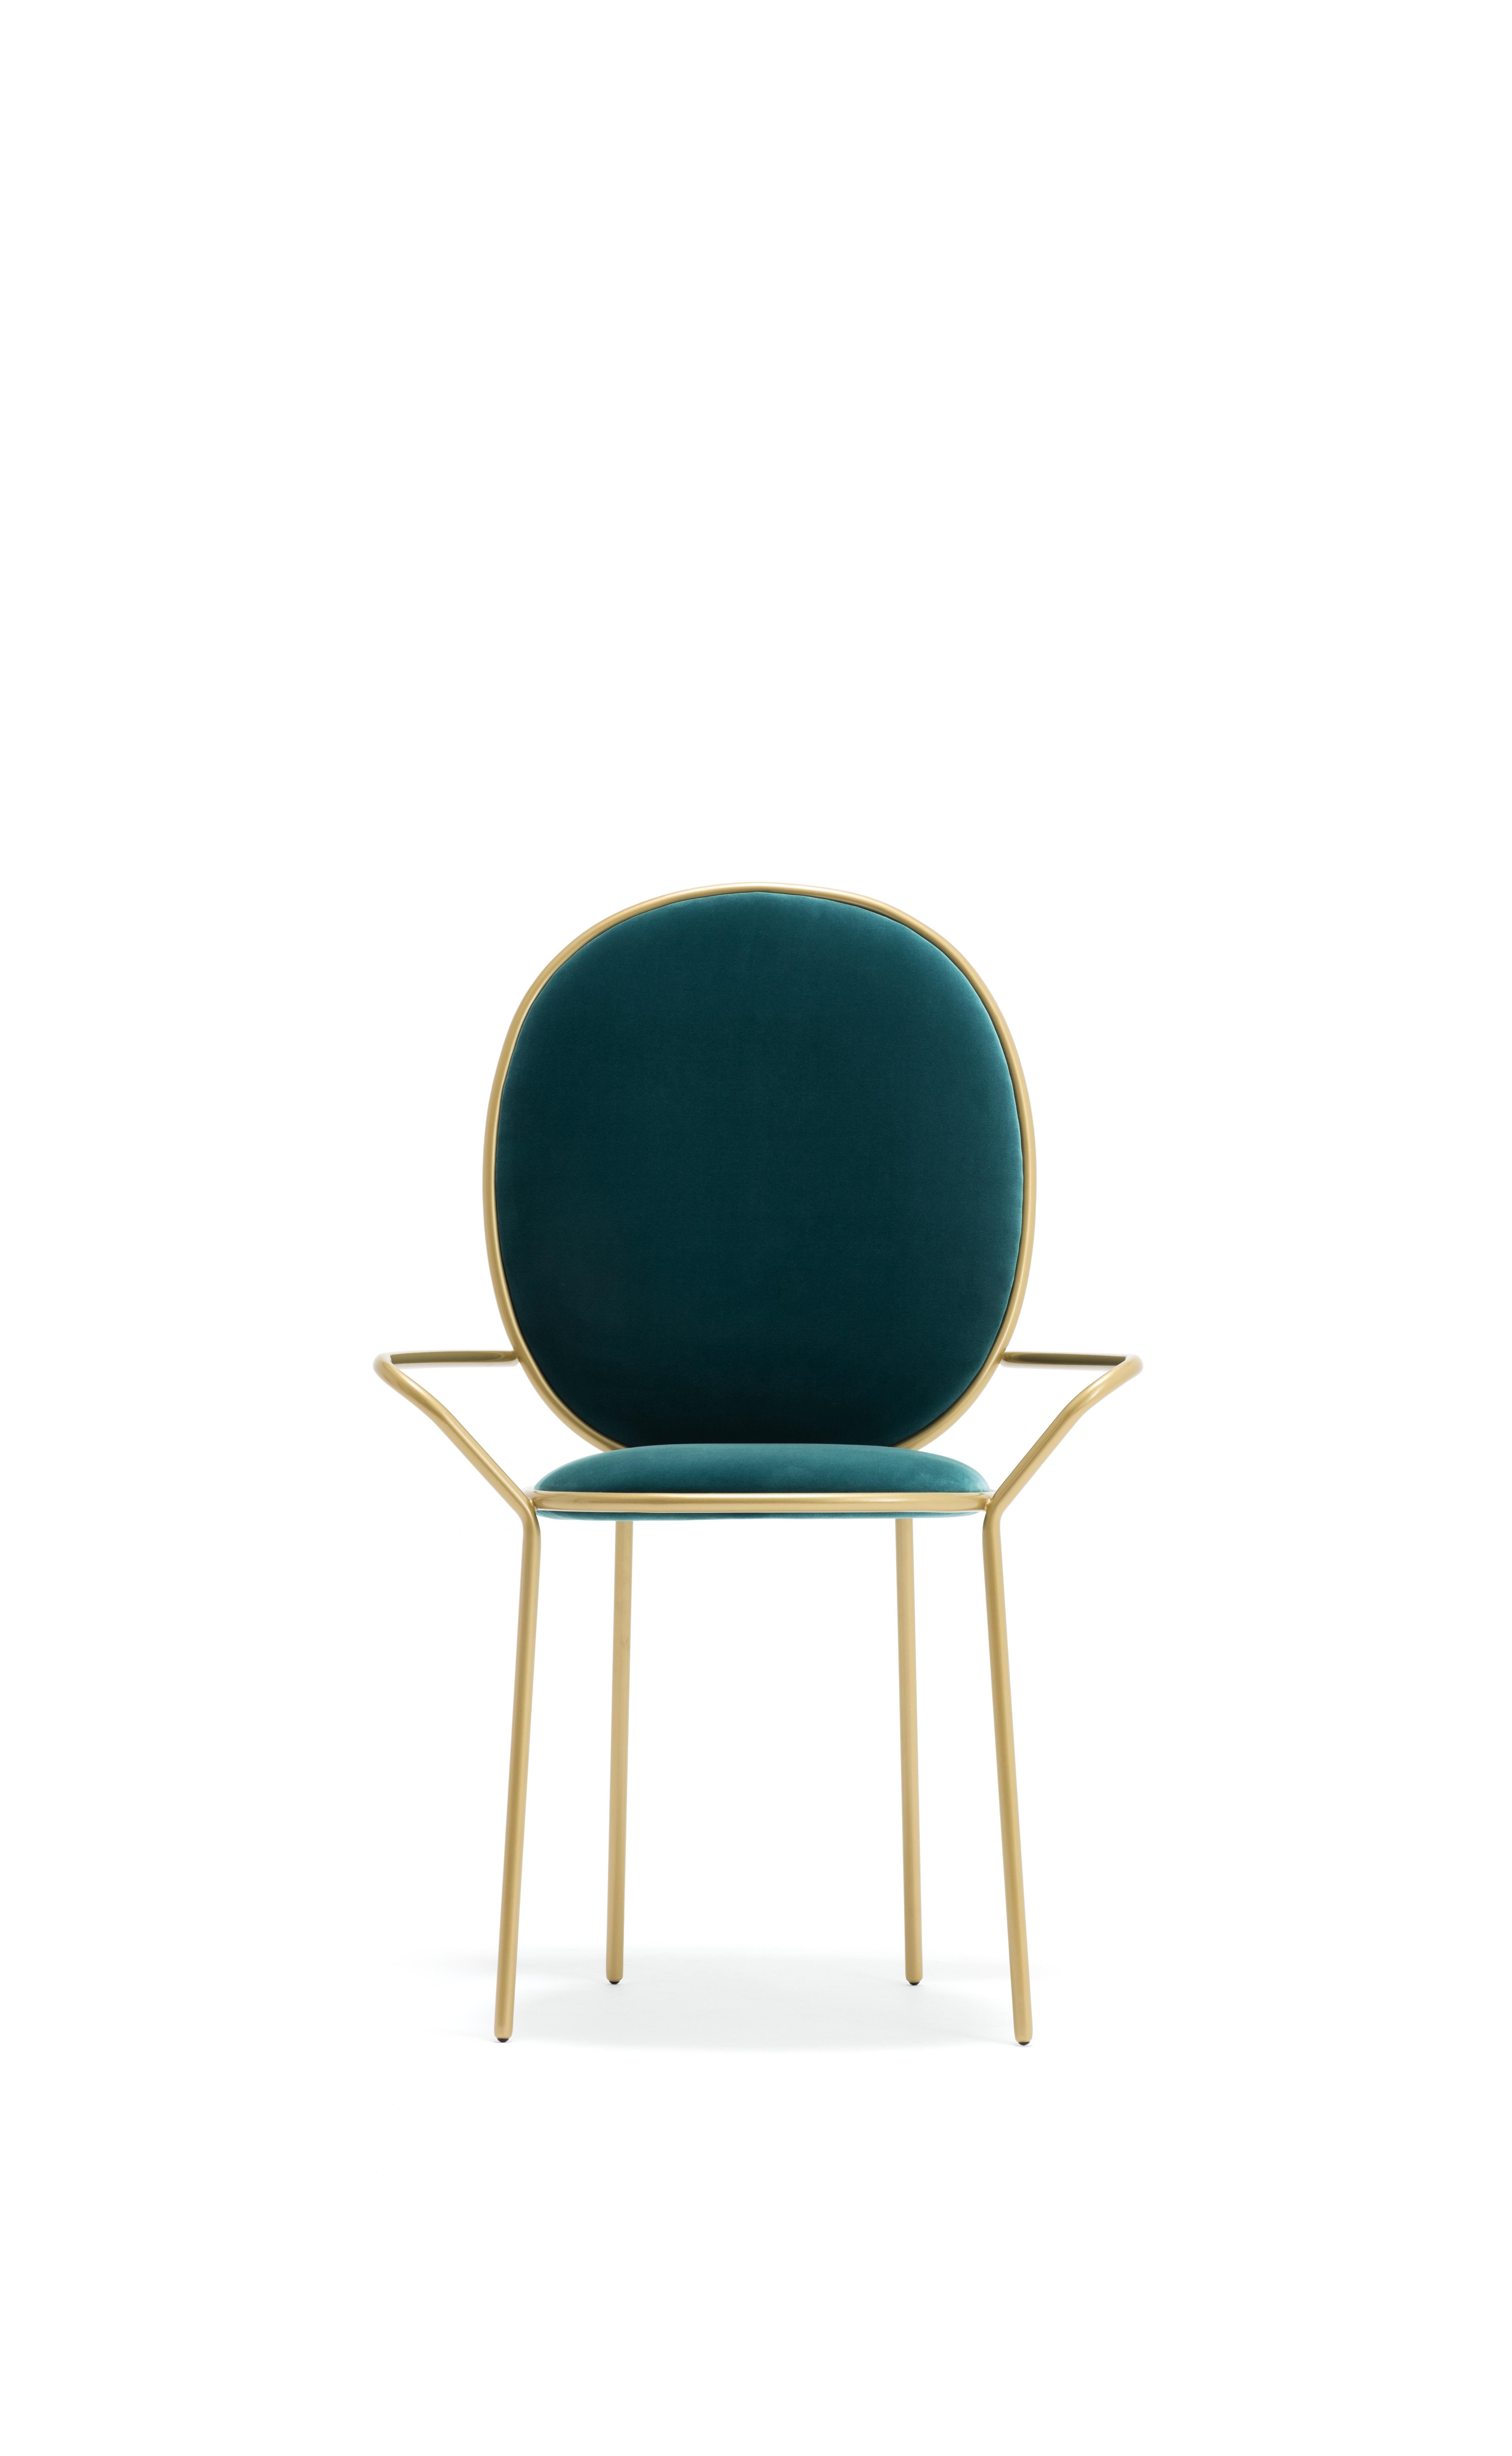 Contemporary Ocean Green Velvet Upholstered Dining Armchair - Stay by Nika Zupanc

The Stay Family turns everyday seating into a special occasion. The Dining Chair and Dining Armchair are variations on an elegant social theme whilst the Dining